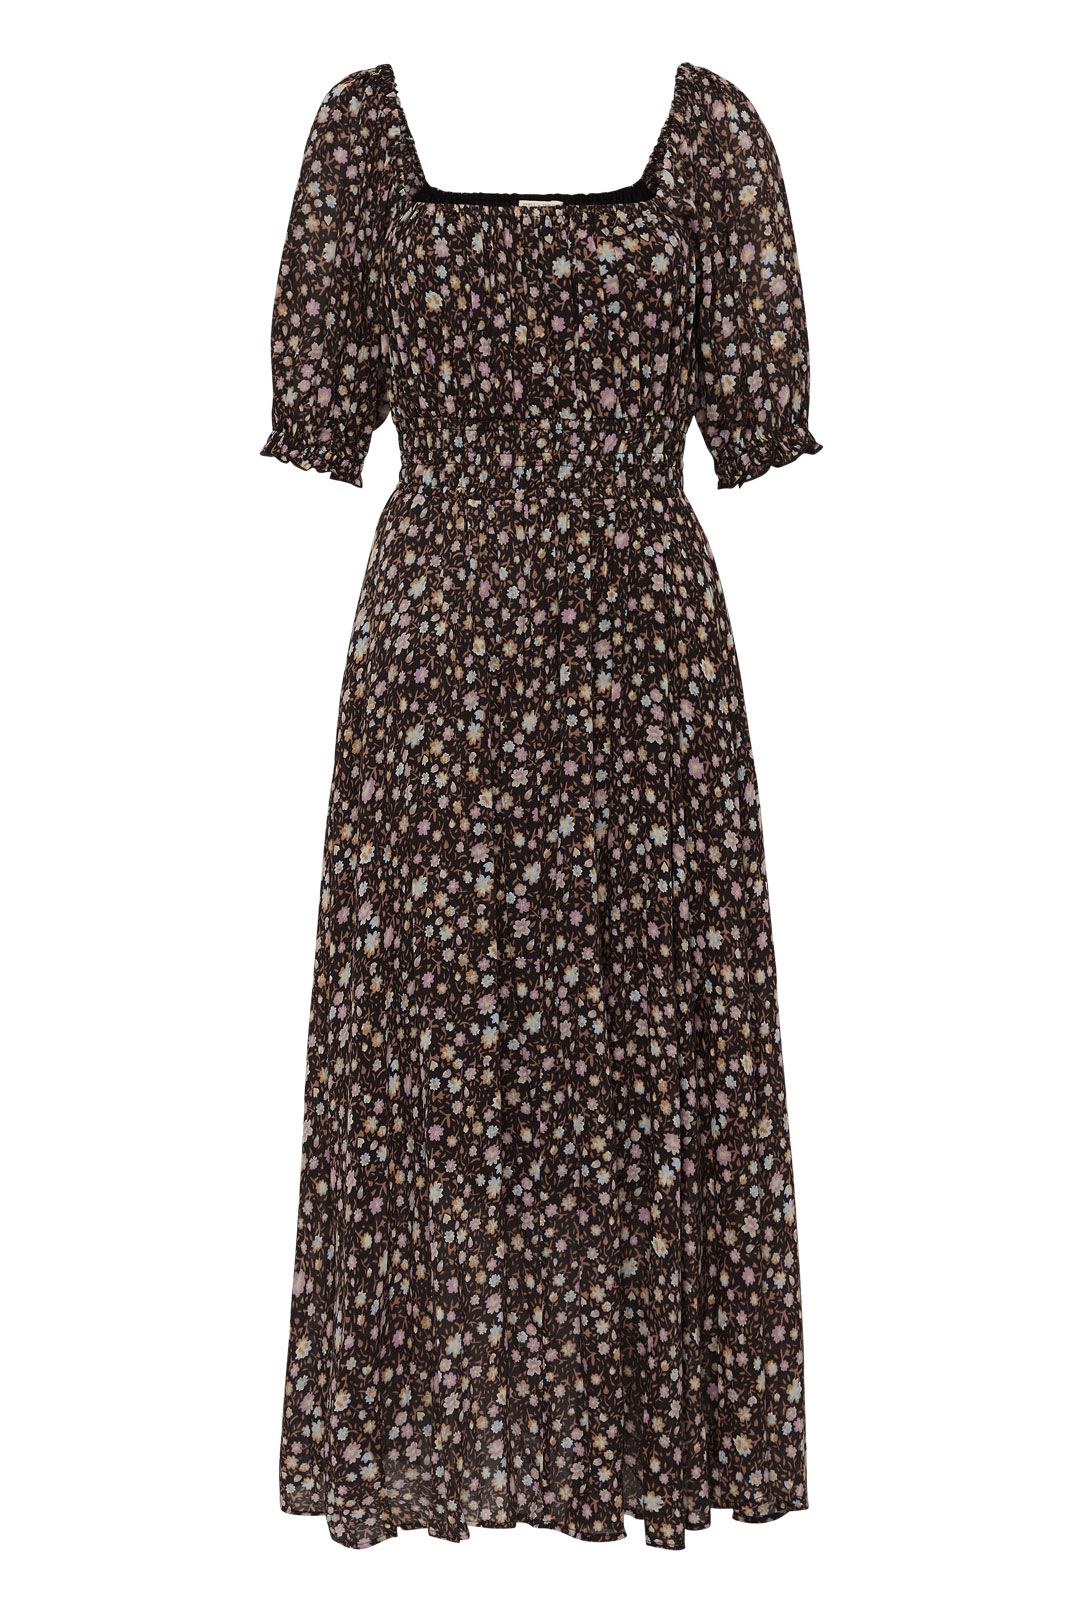 Spell Rae Midi Dress Black Floral Fit and Flare